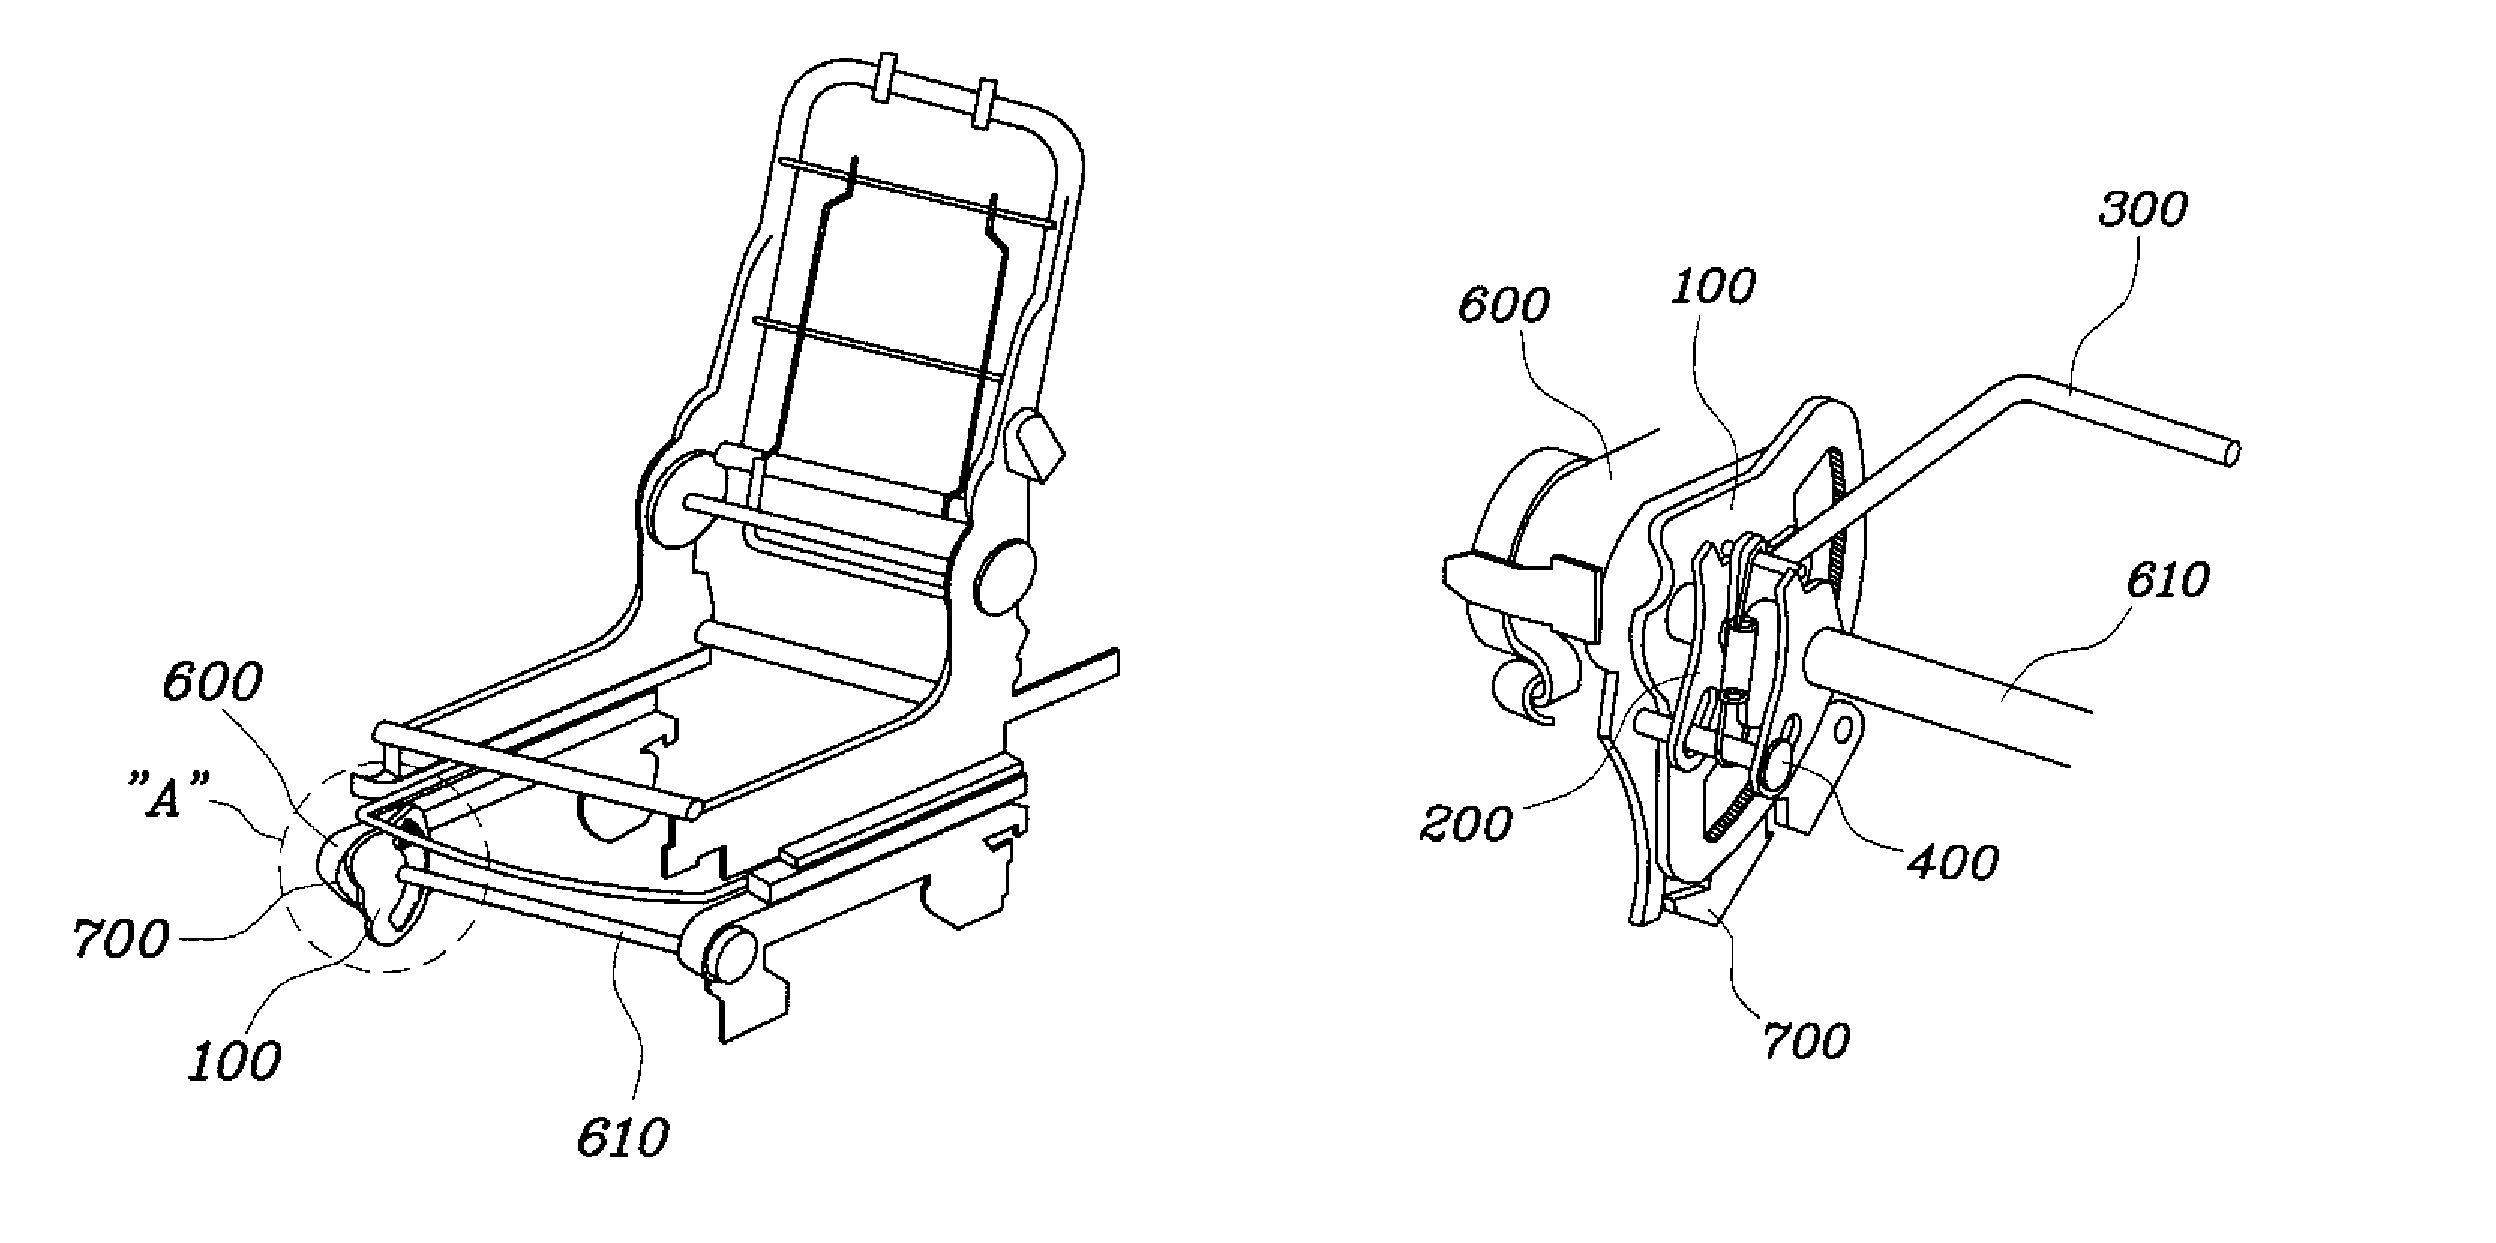 Apparatus for locking double-folding seat for vehicles